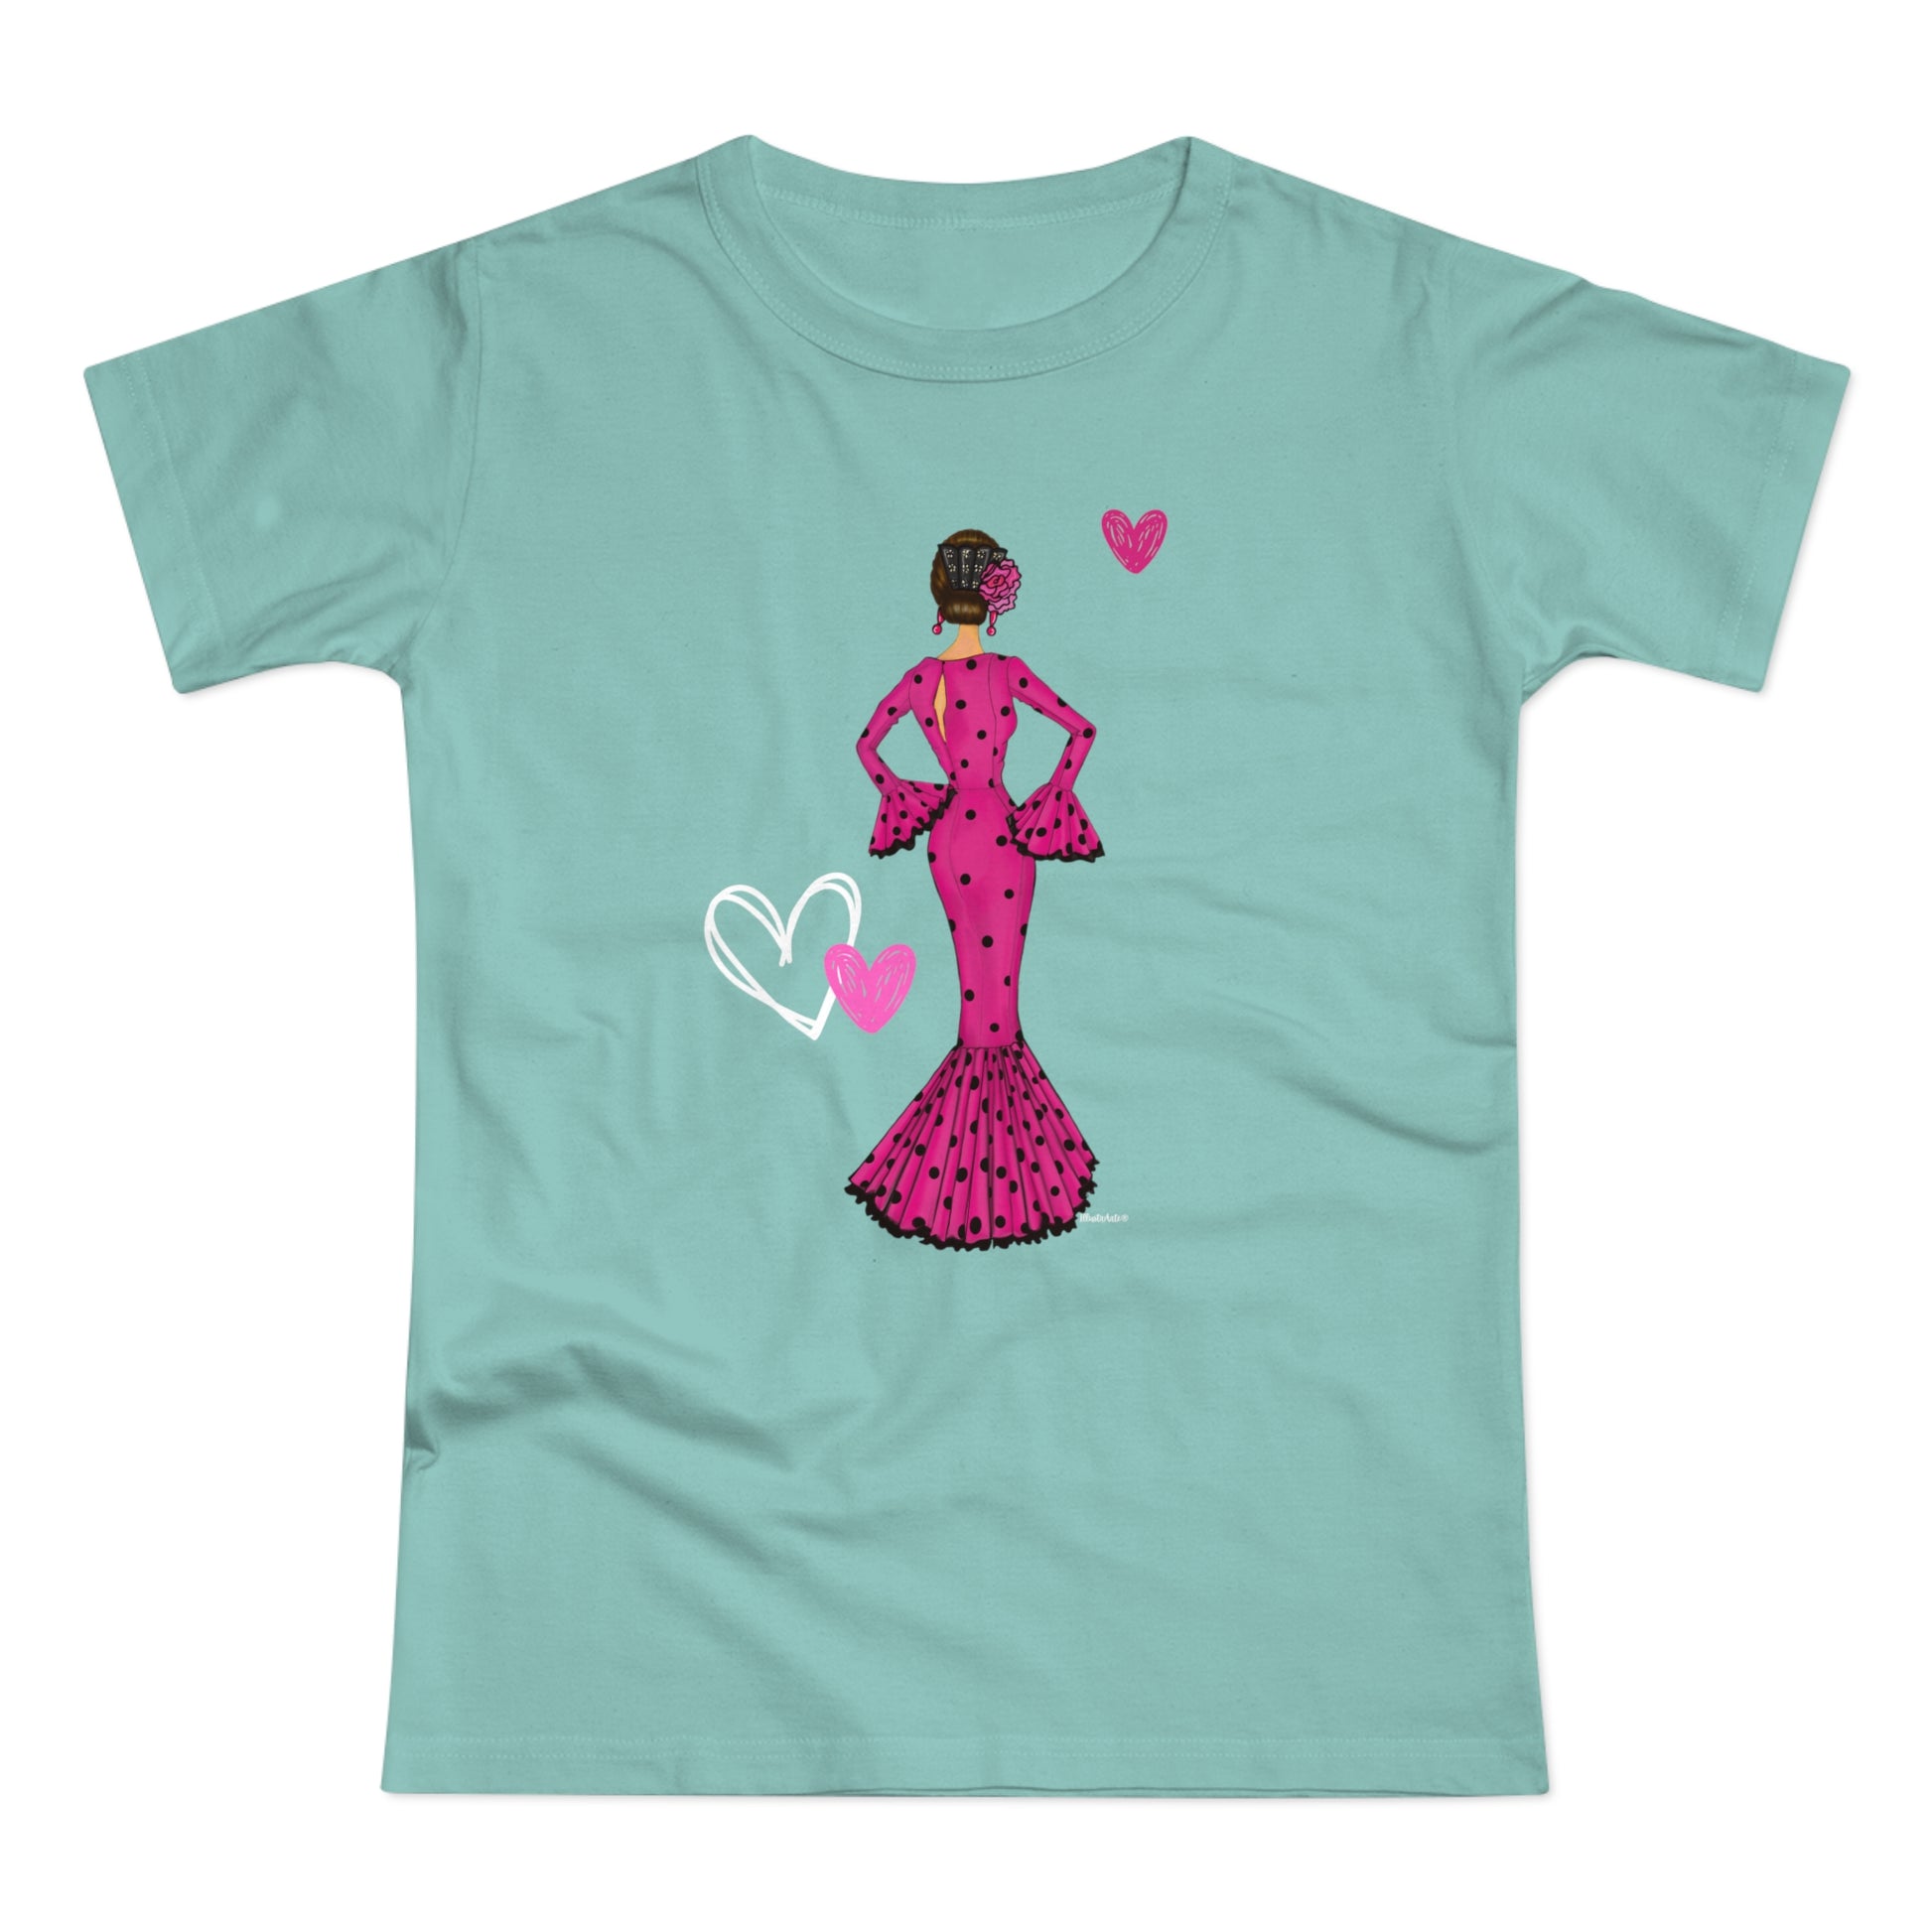 a t - shirt with a woman in a pink dress holding a heart